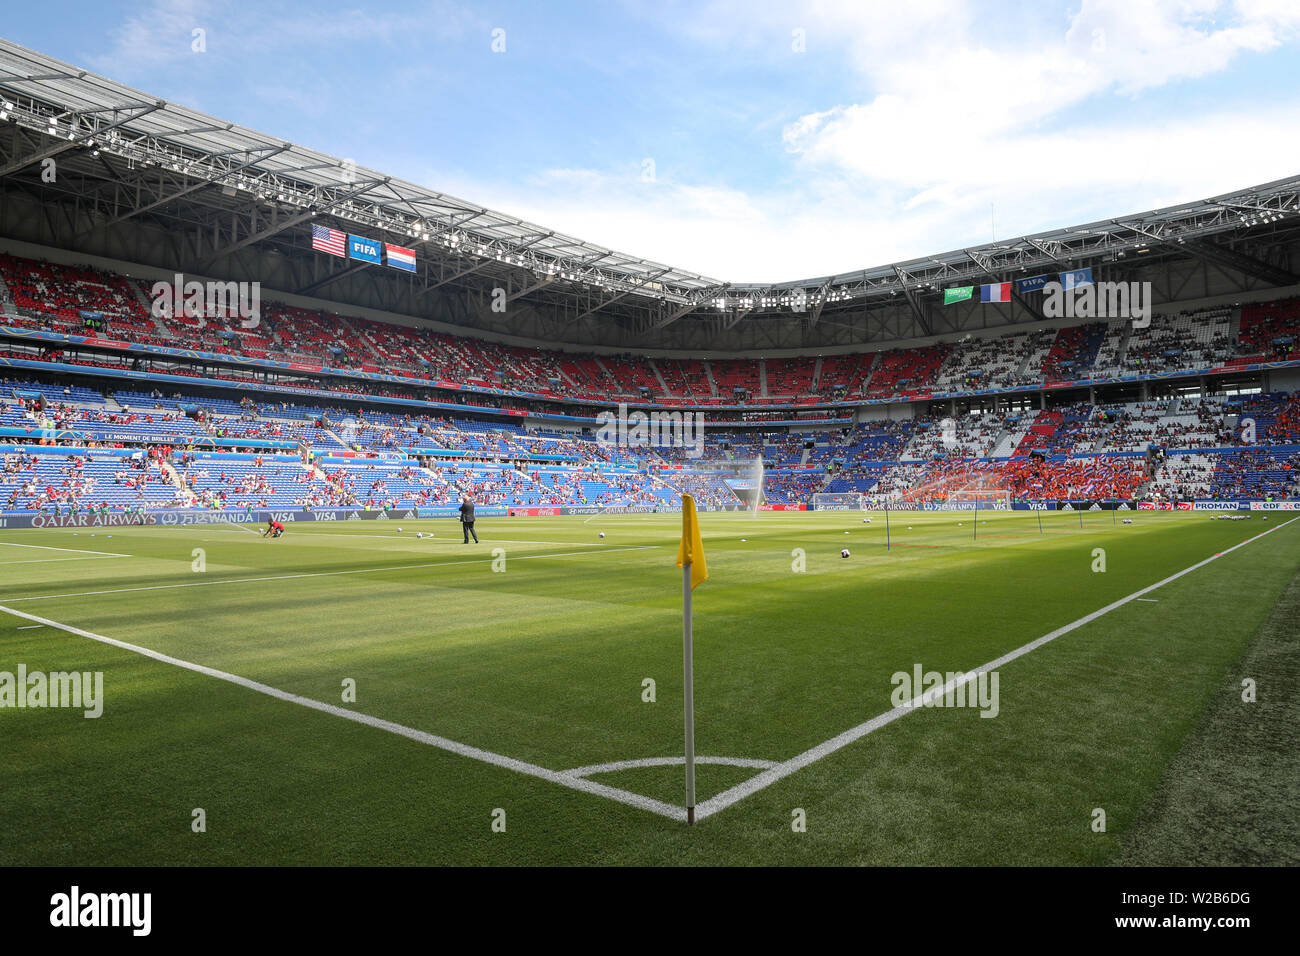 Lyon, France. 24th Mar, 2019. Atmosphere before the match between the United States and the Netherlands validated by the Final of the Women 's Soccer World Cup in Lyon in France on Sunday, 07. Credit: Brazil Photo Press/Alamy Live News Stock Photo